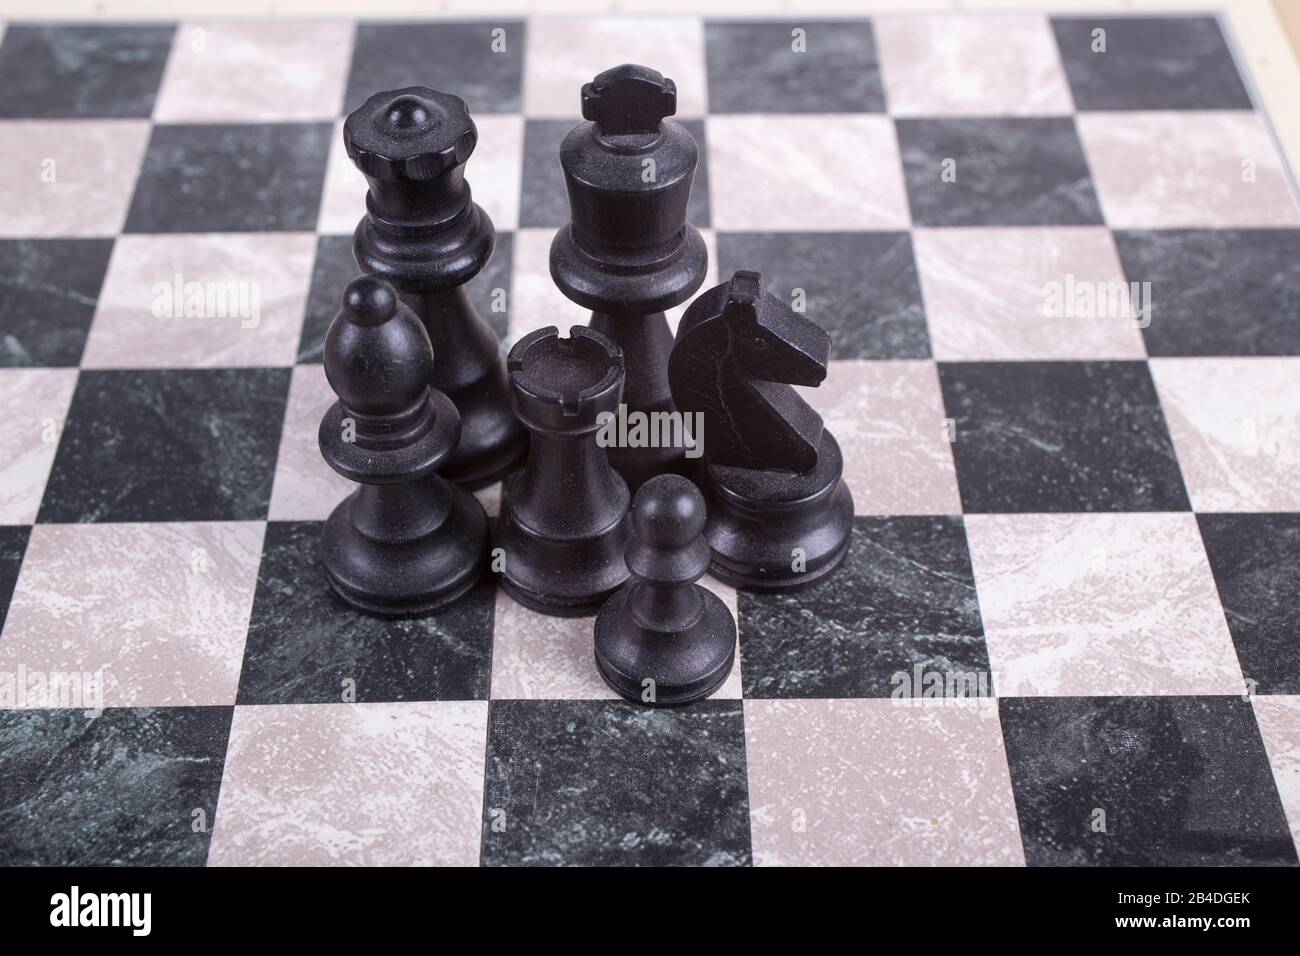 Premium Photo  The golden horse, knight chess piece standing in front of  silver pawn chess pieces on chessboard on dark background. leadership,  follower, team, commander, competition, and business strategy concept.